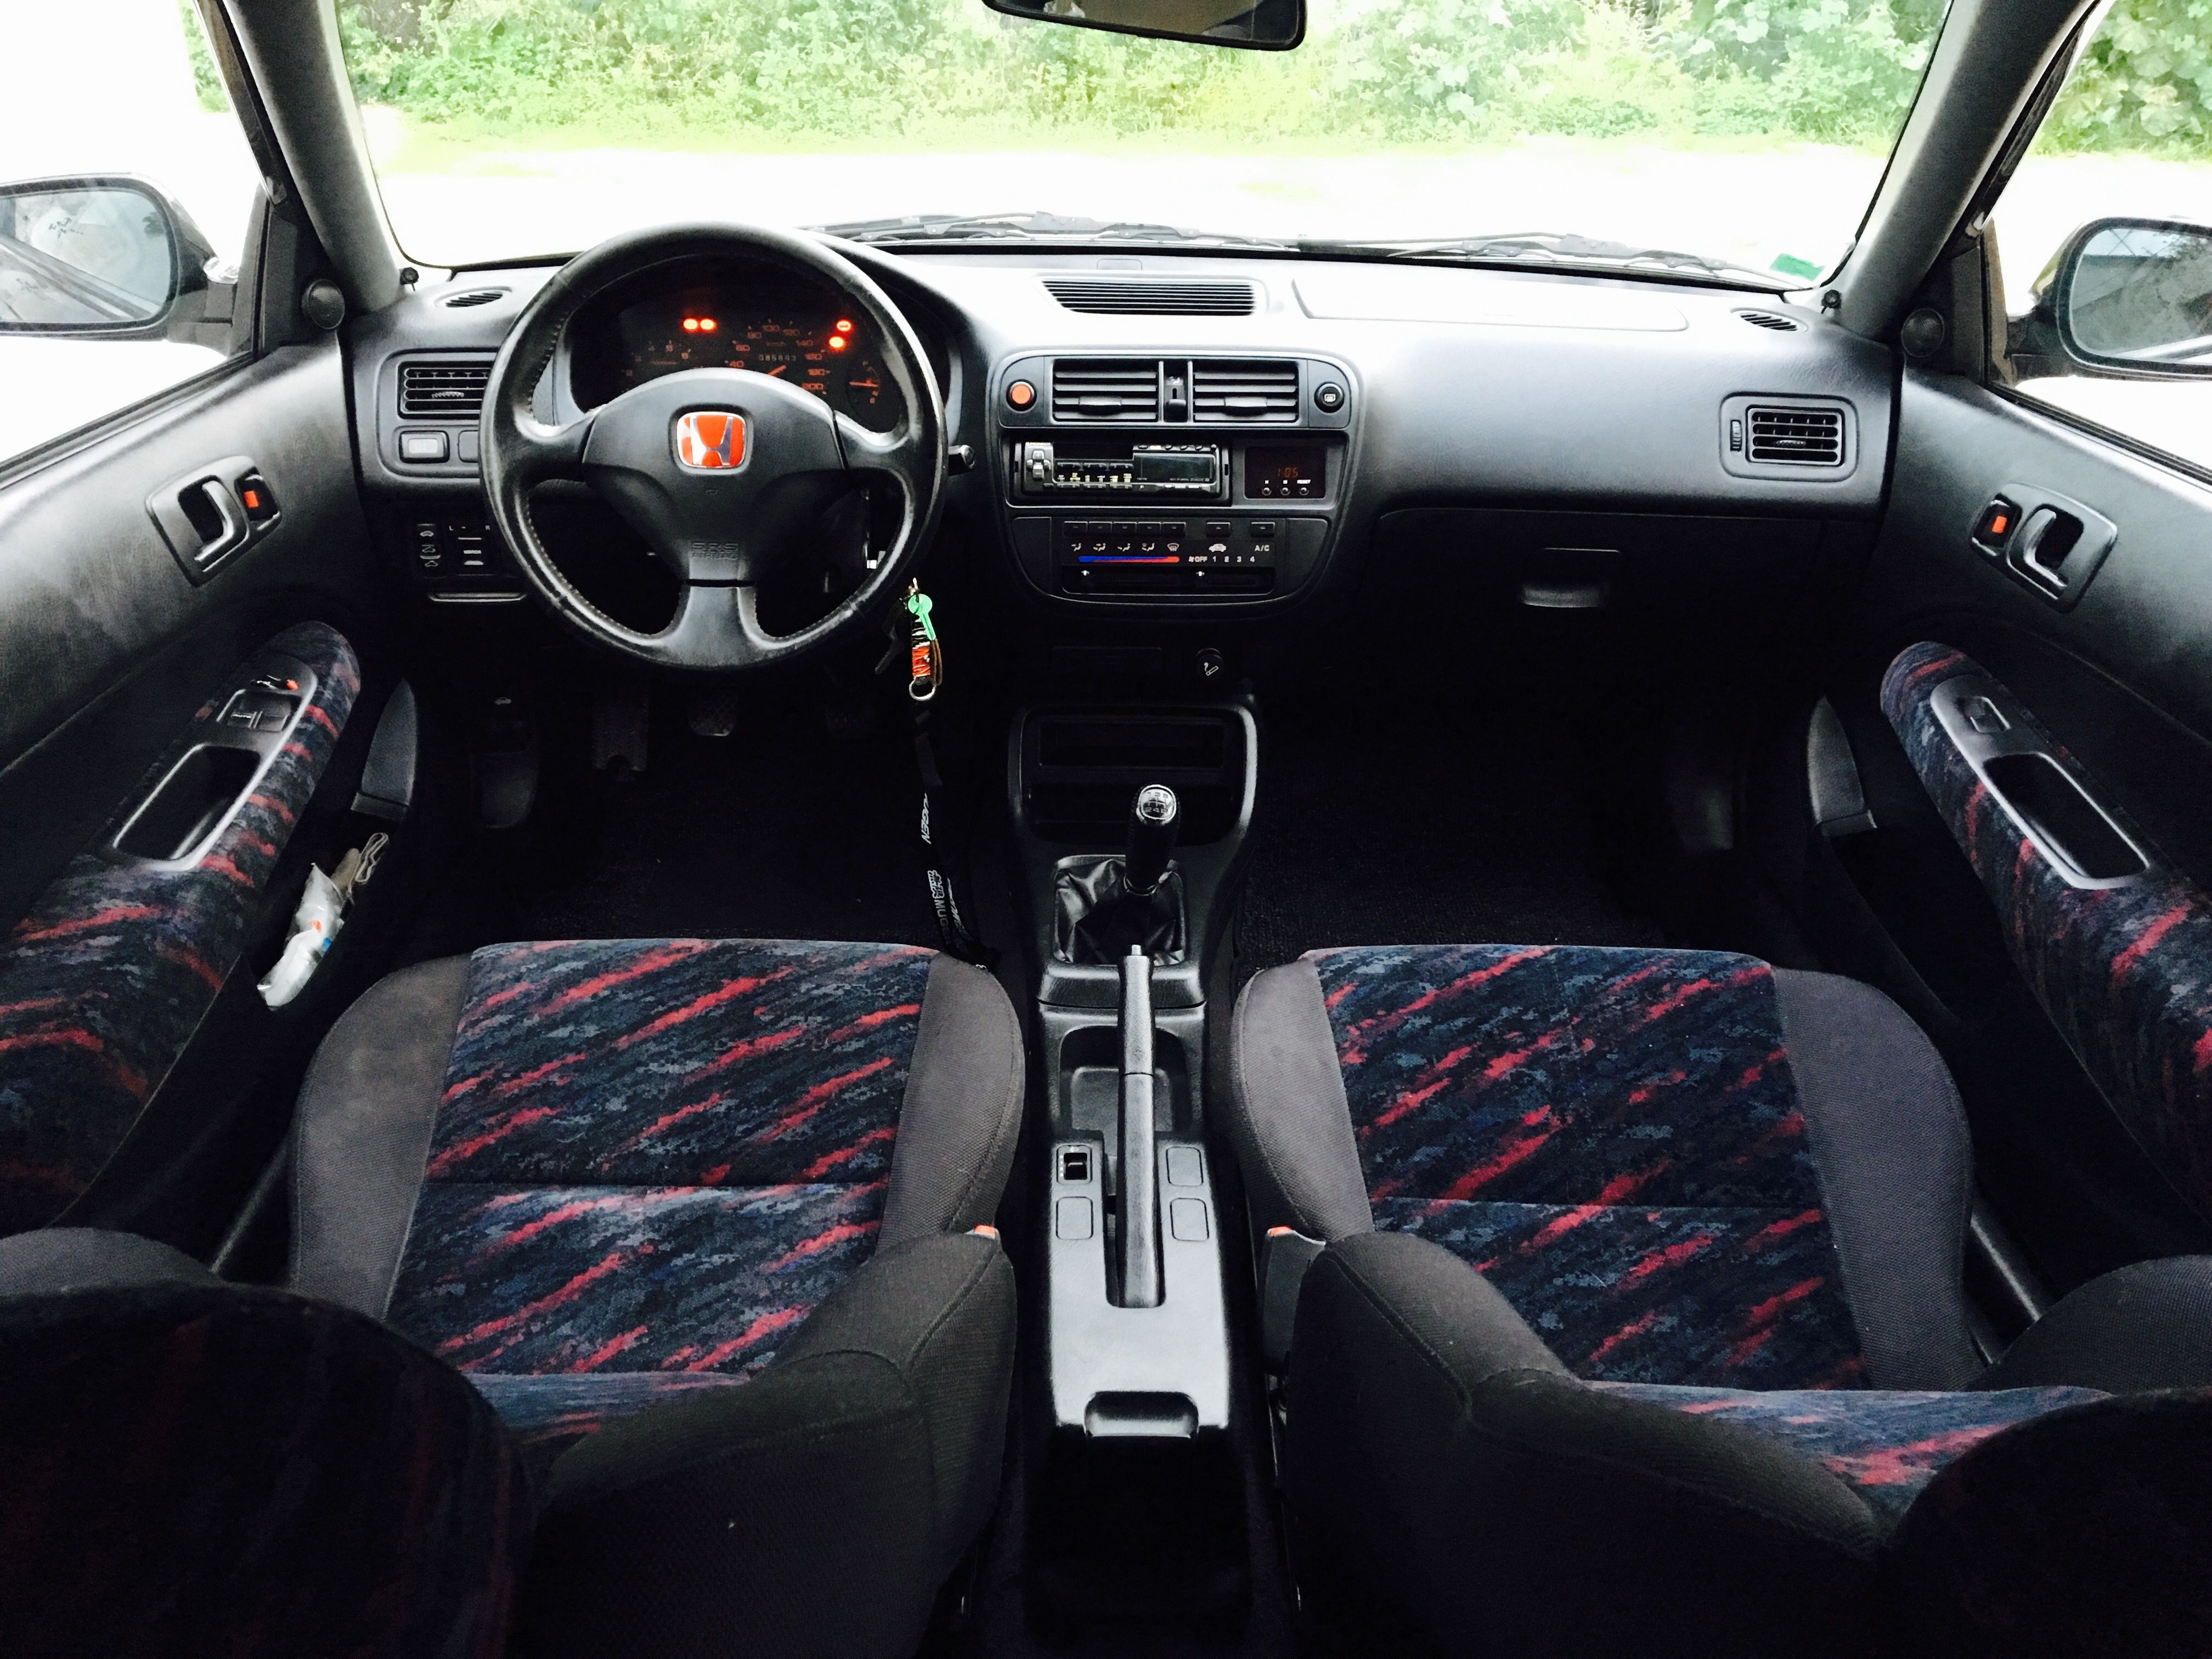 The design of the EK interior is pretty standard fare for an economy car at...